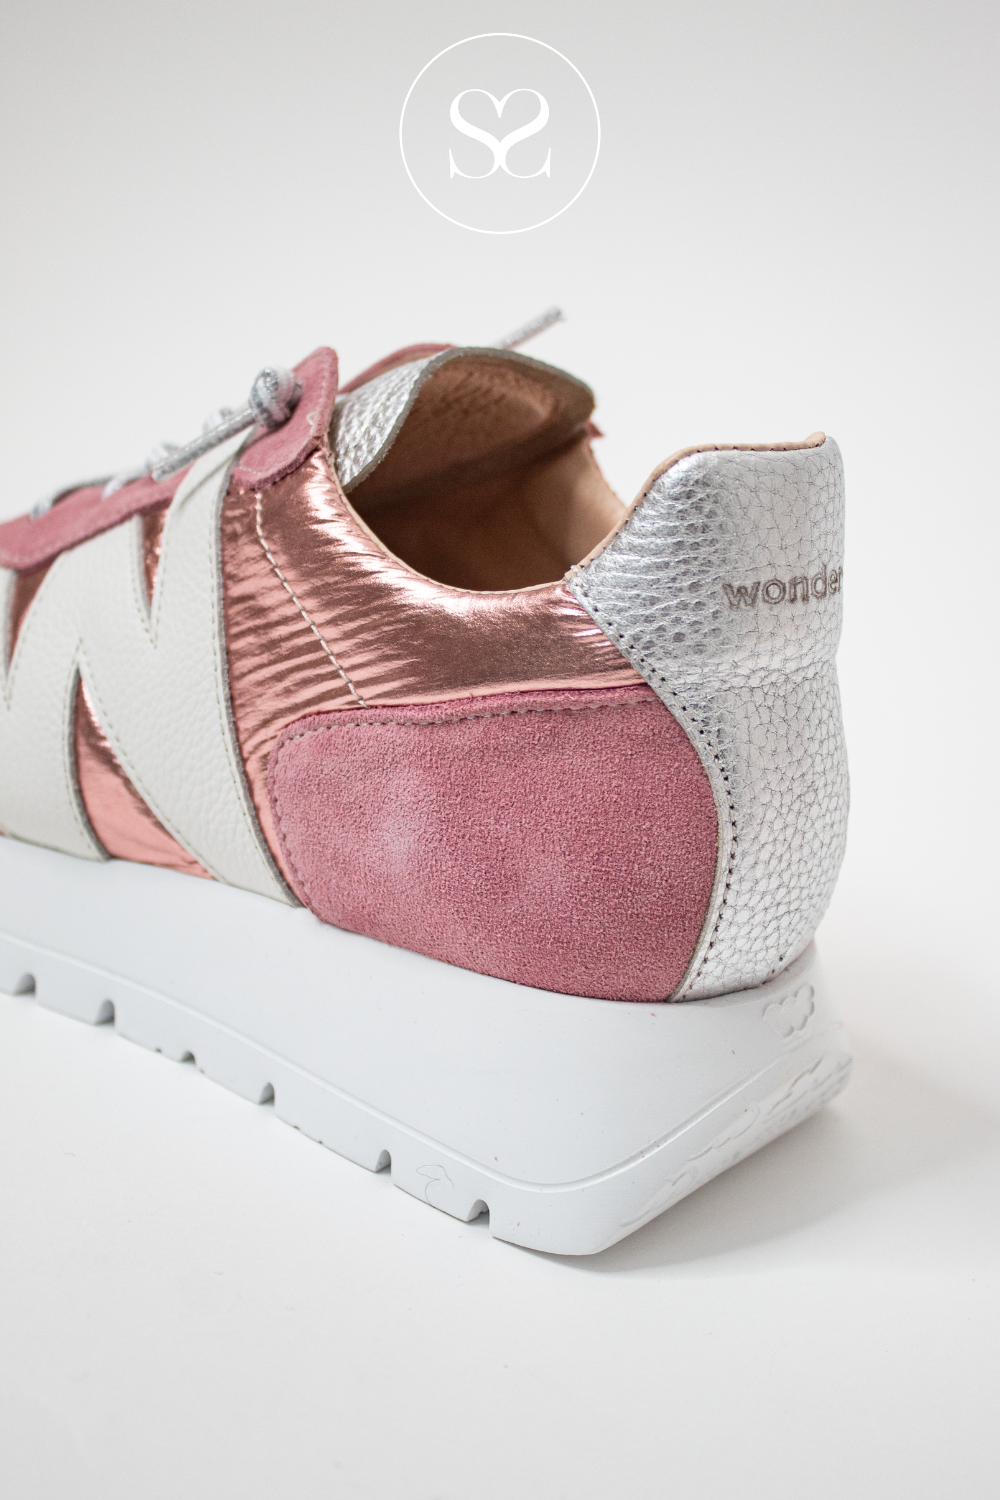 WONDERS A-2464 PINK WEDGE TRAINERS WITH WHITE WONDERS LOGO AND SOLE AND ELASTICATED LACE